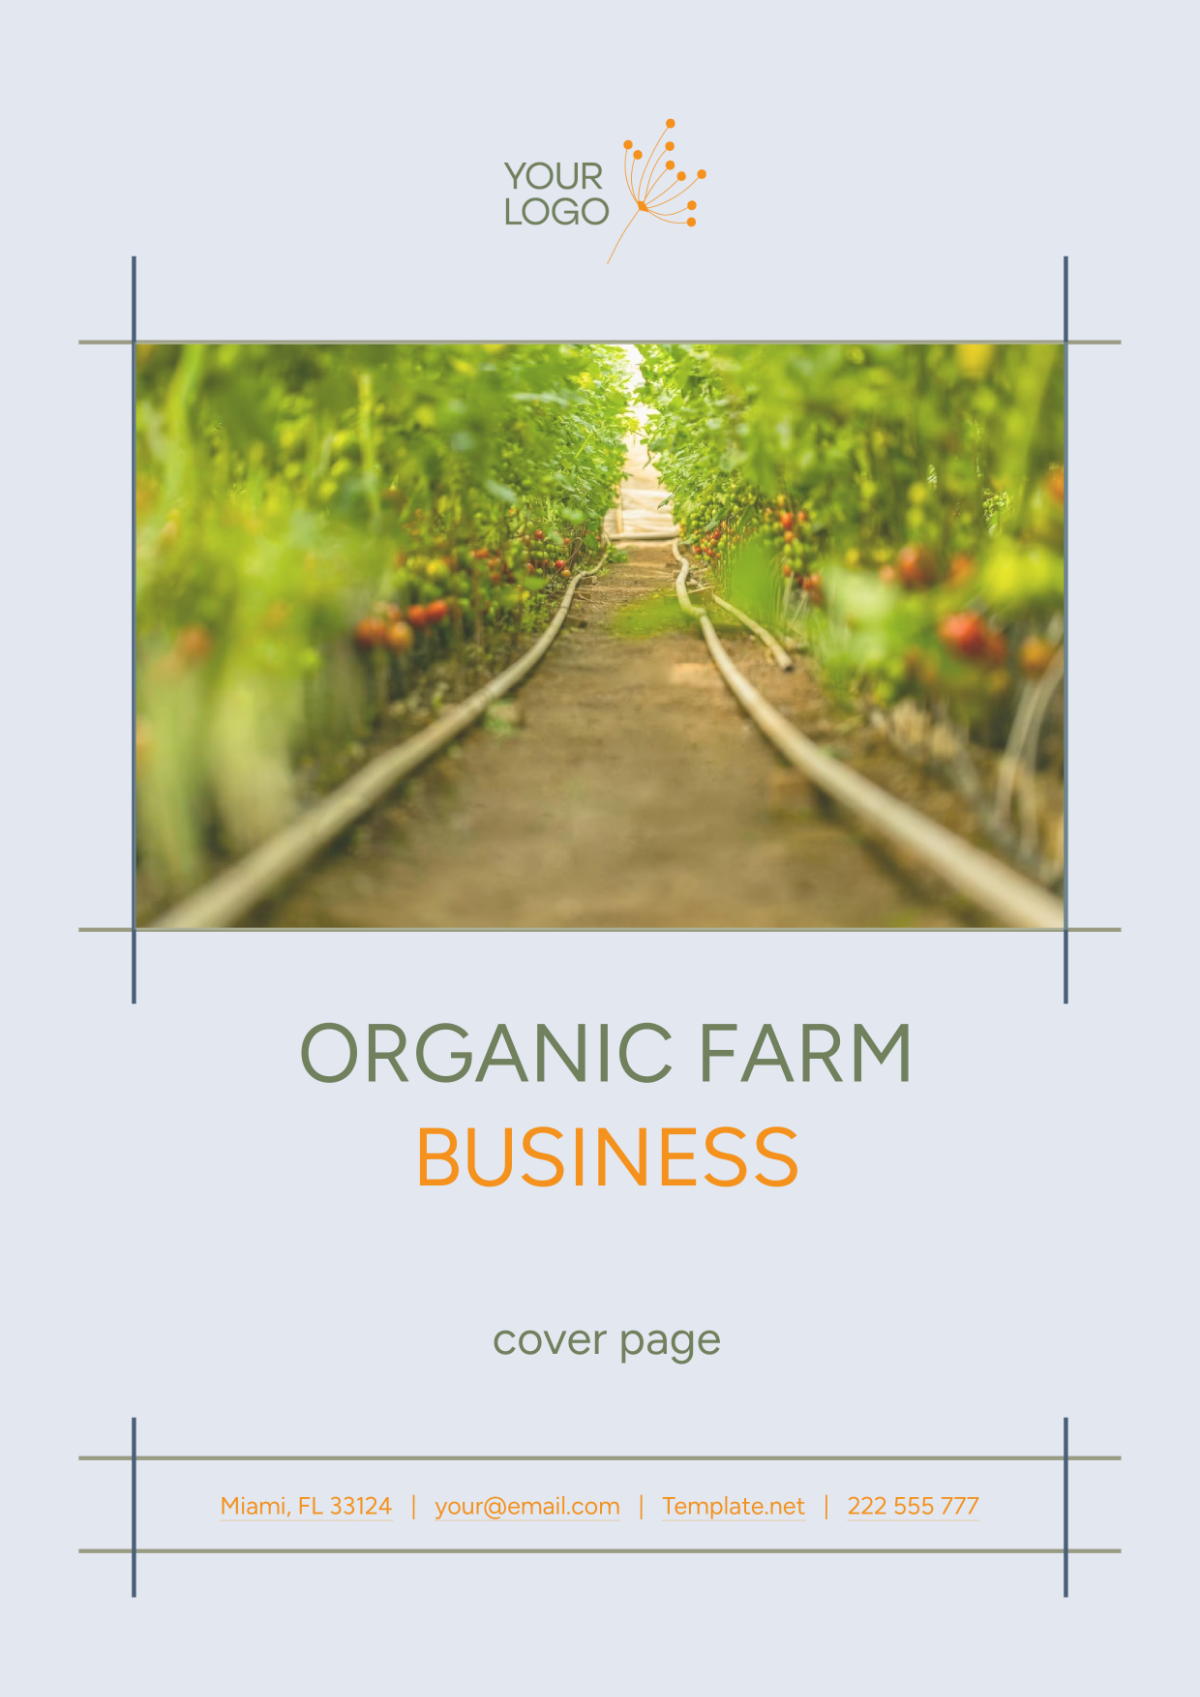 Organic Farm Business Cover Page